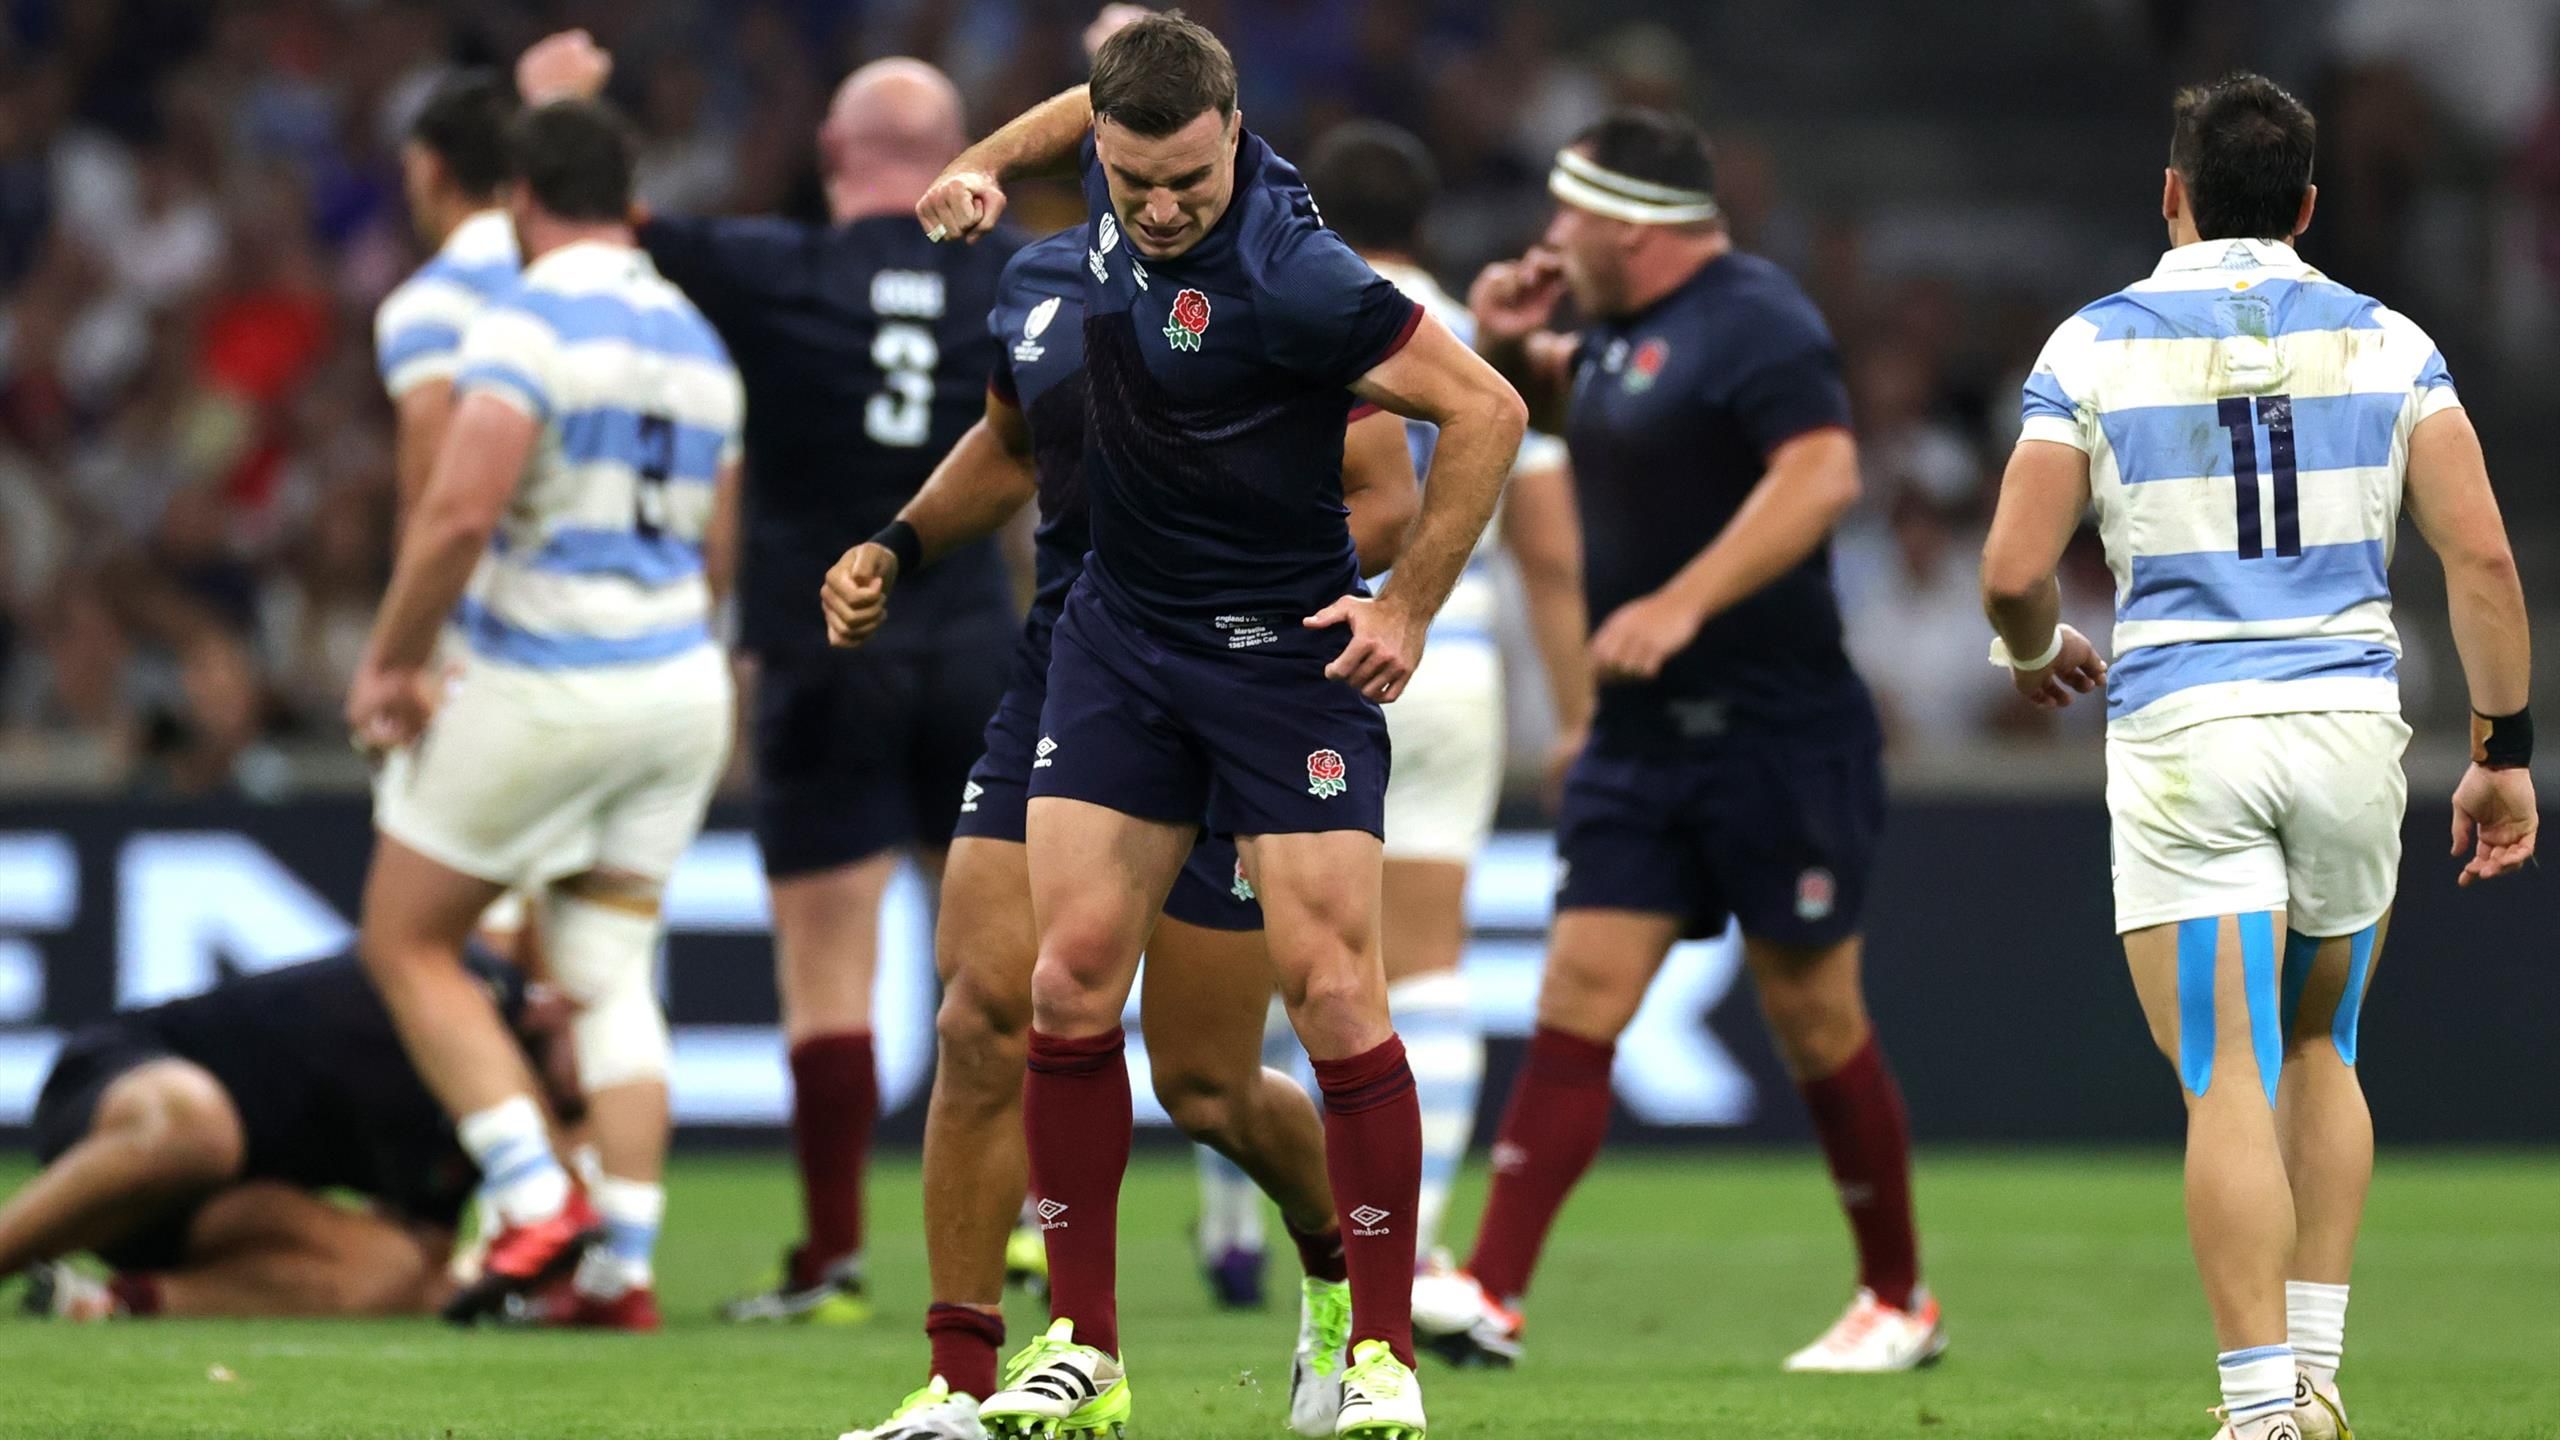 England 27-10 Argentina George Ford stars to kick off Rugby World Cup campaign in style despite Tom Curry red